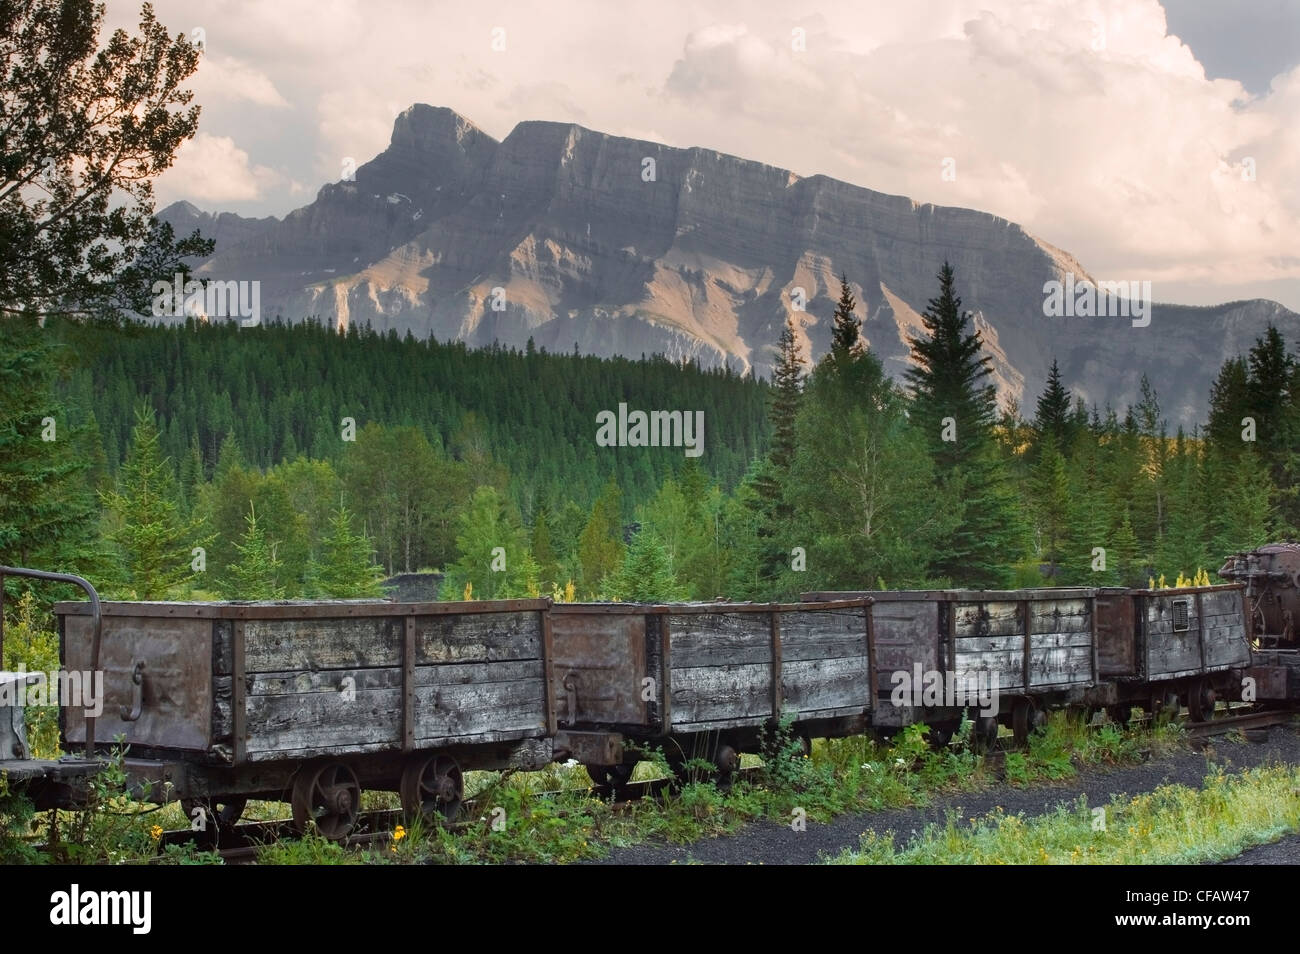 Coal cars at Lower Bankhead with Mt. Rundle in the background, Banff National Park, Alberta, Canada Stock Photo